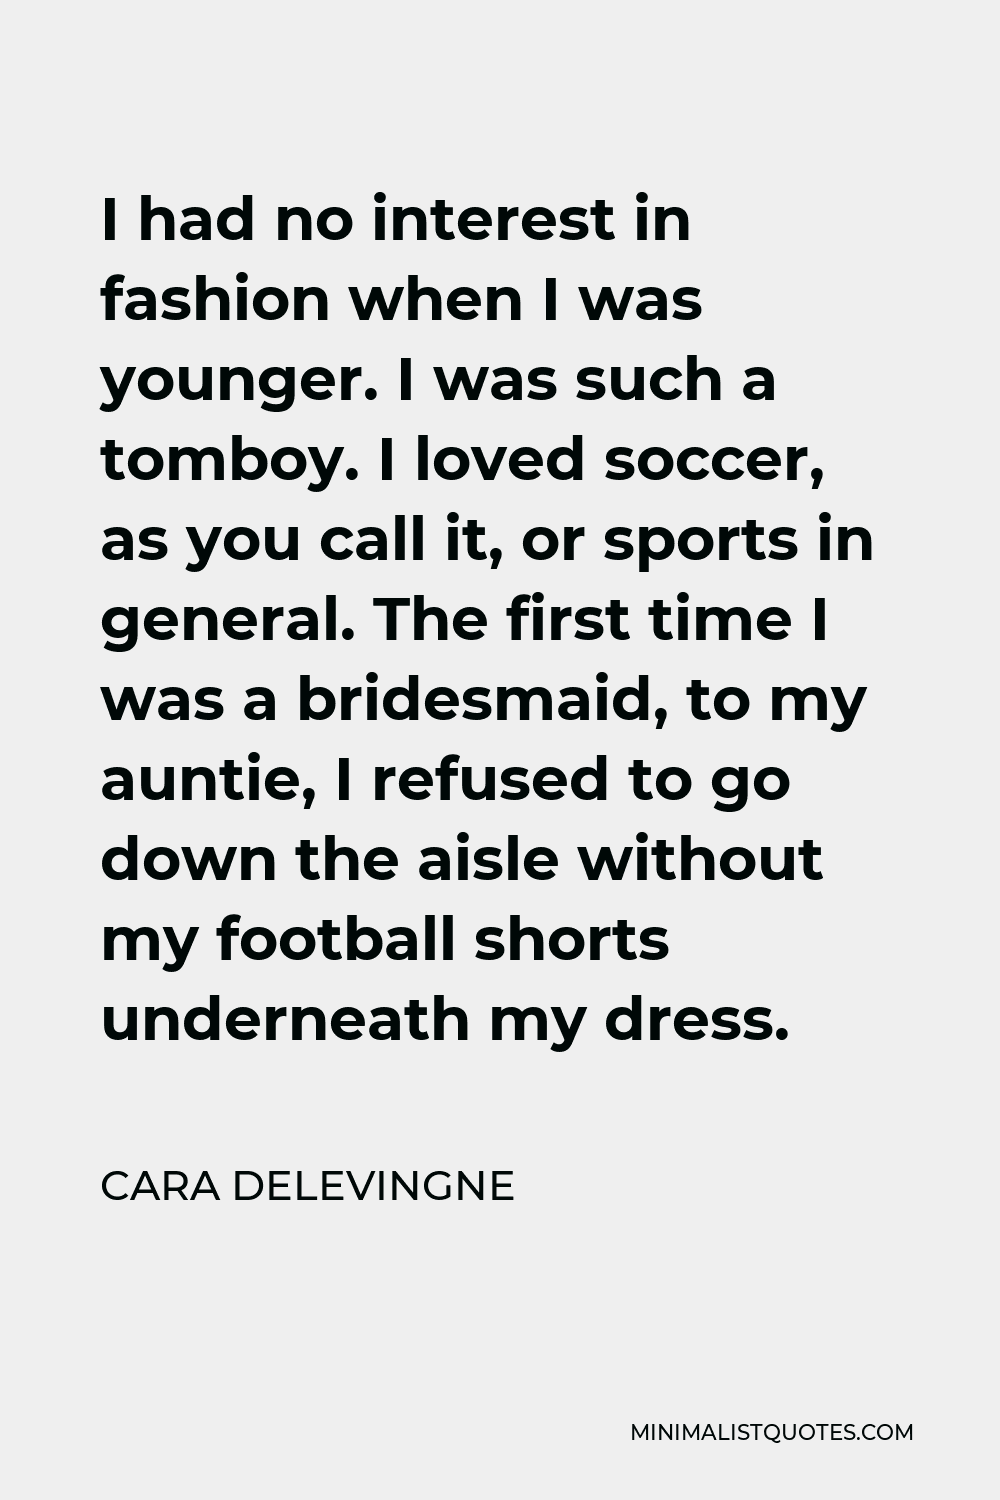 Cara Delevingne Quote - I had no interest in fashion when I was younger. I was such a tomboy.